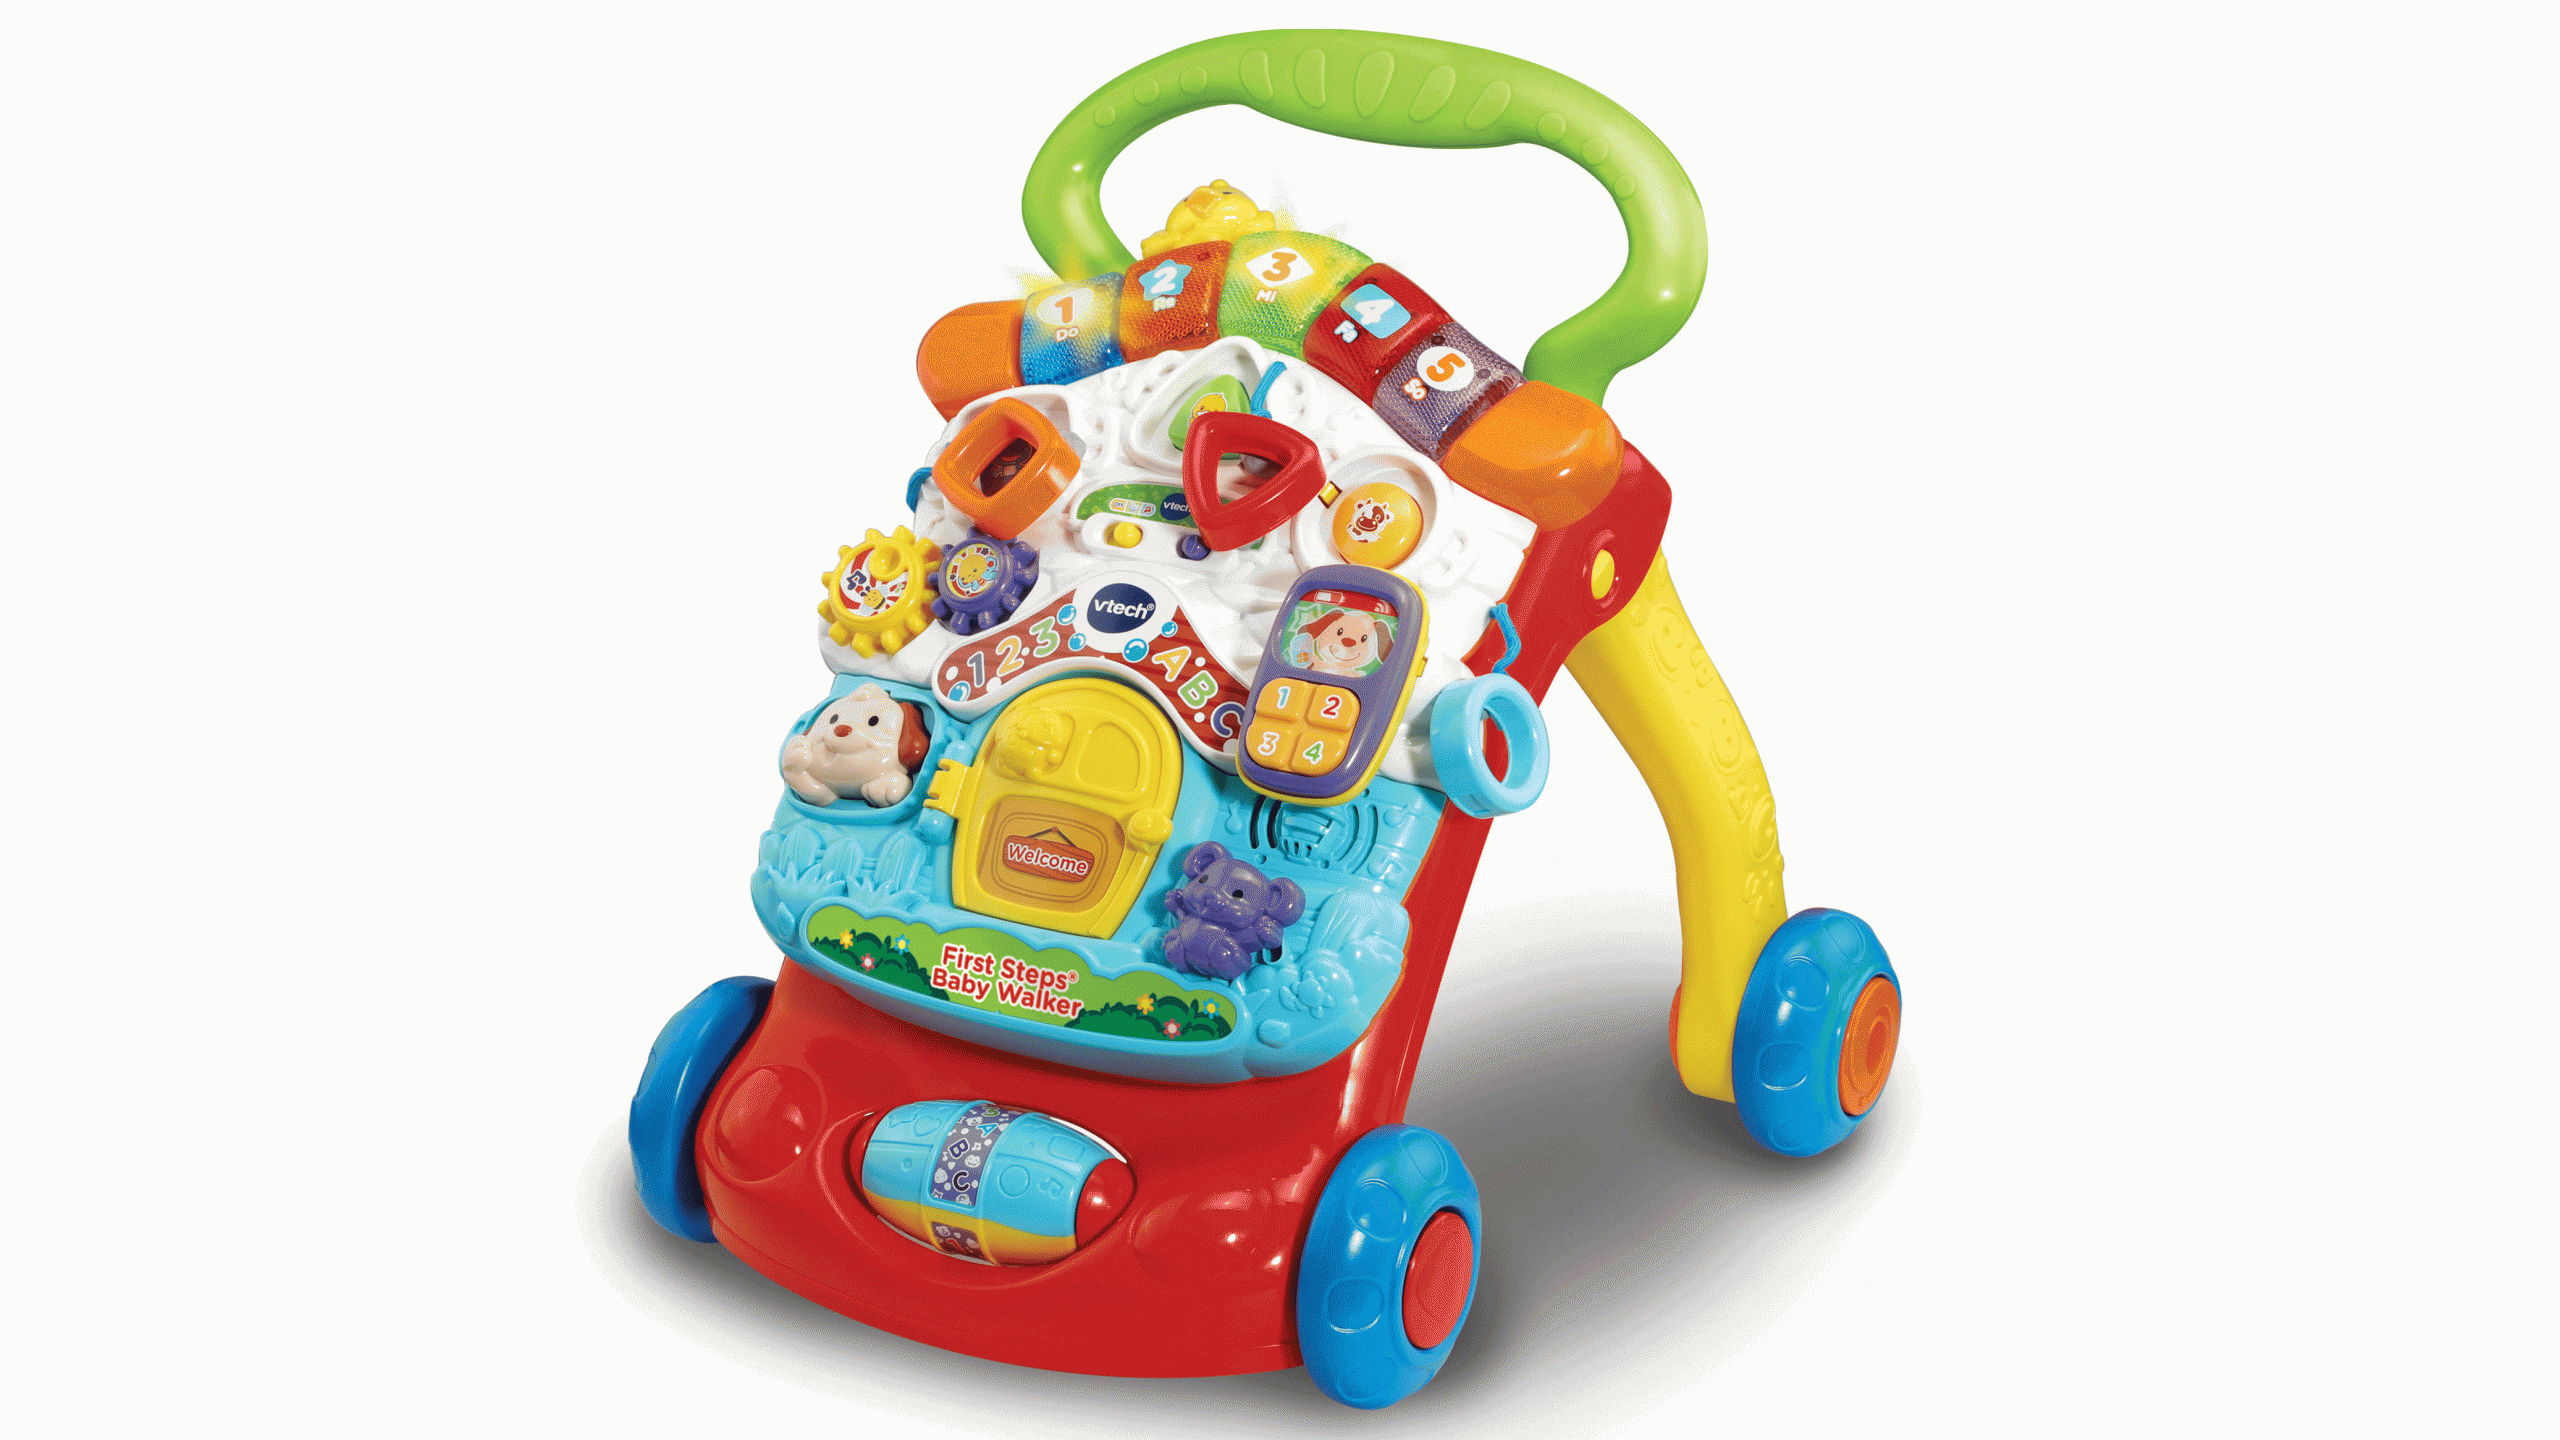 Vtech First Steps Baby Walker is in our list of the best baby walkers